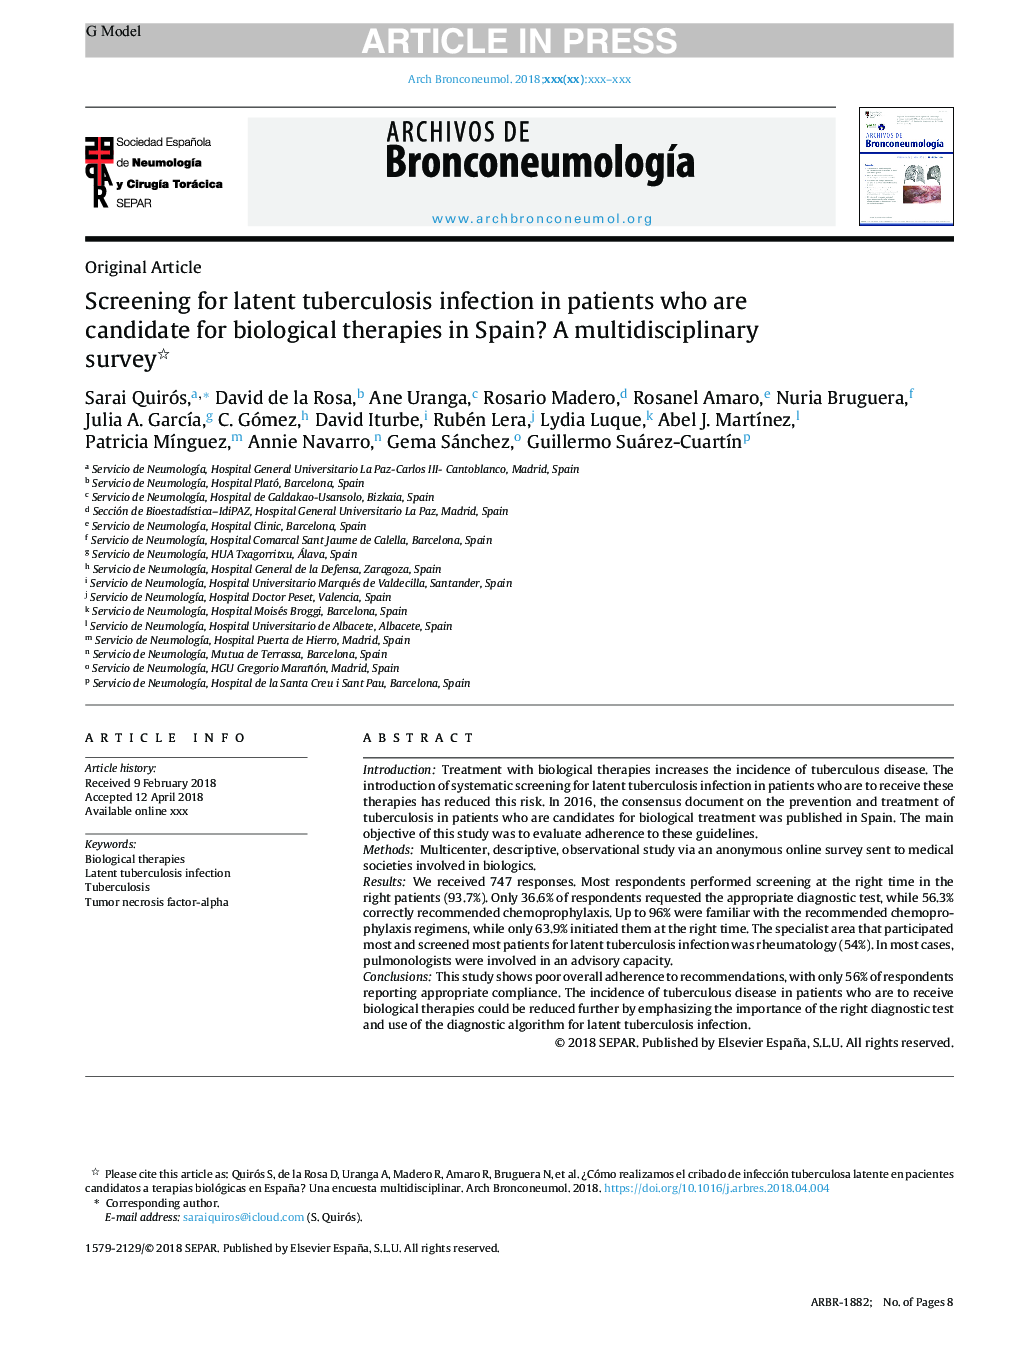 Screening for latent tuberculosis infection in patients who are candidate for biological therapies in Spain? A multidisciplinary survey